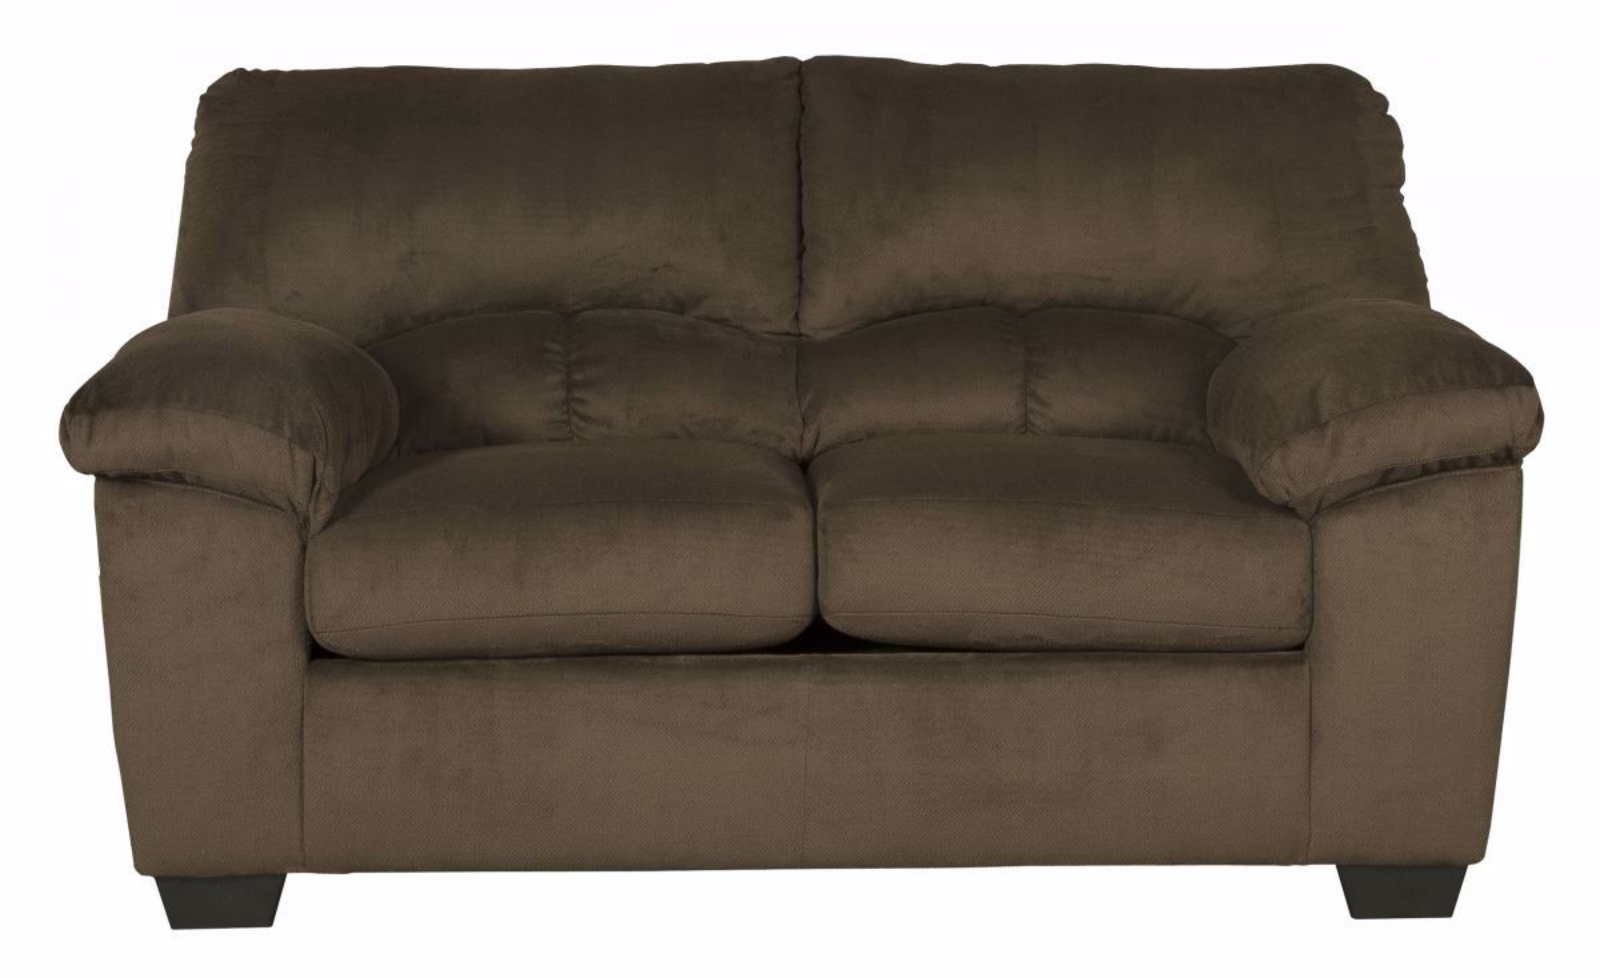 Picture of Dailey Loveseat